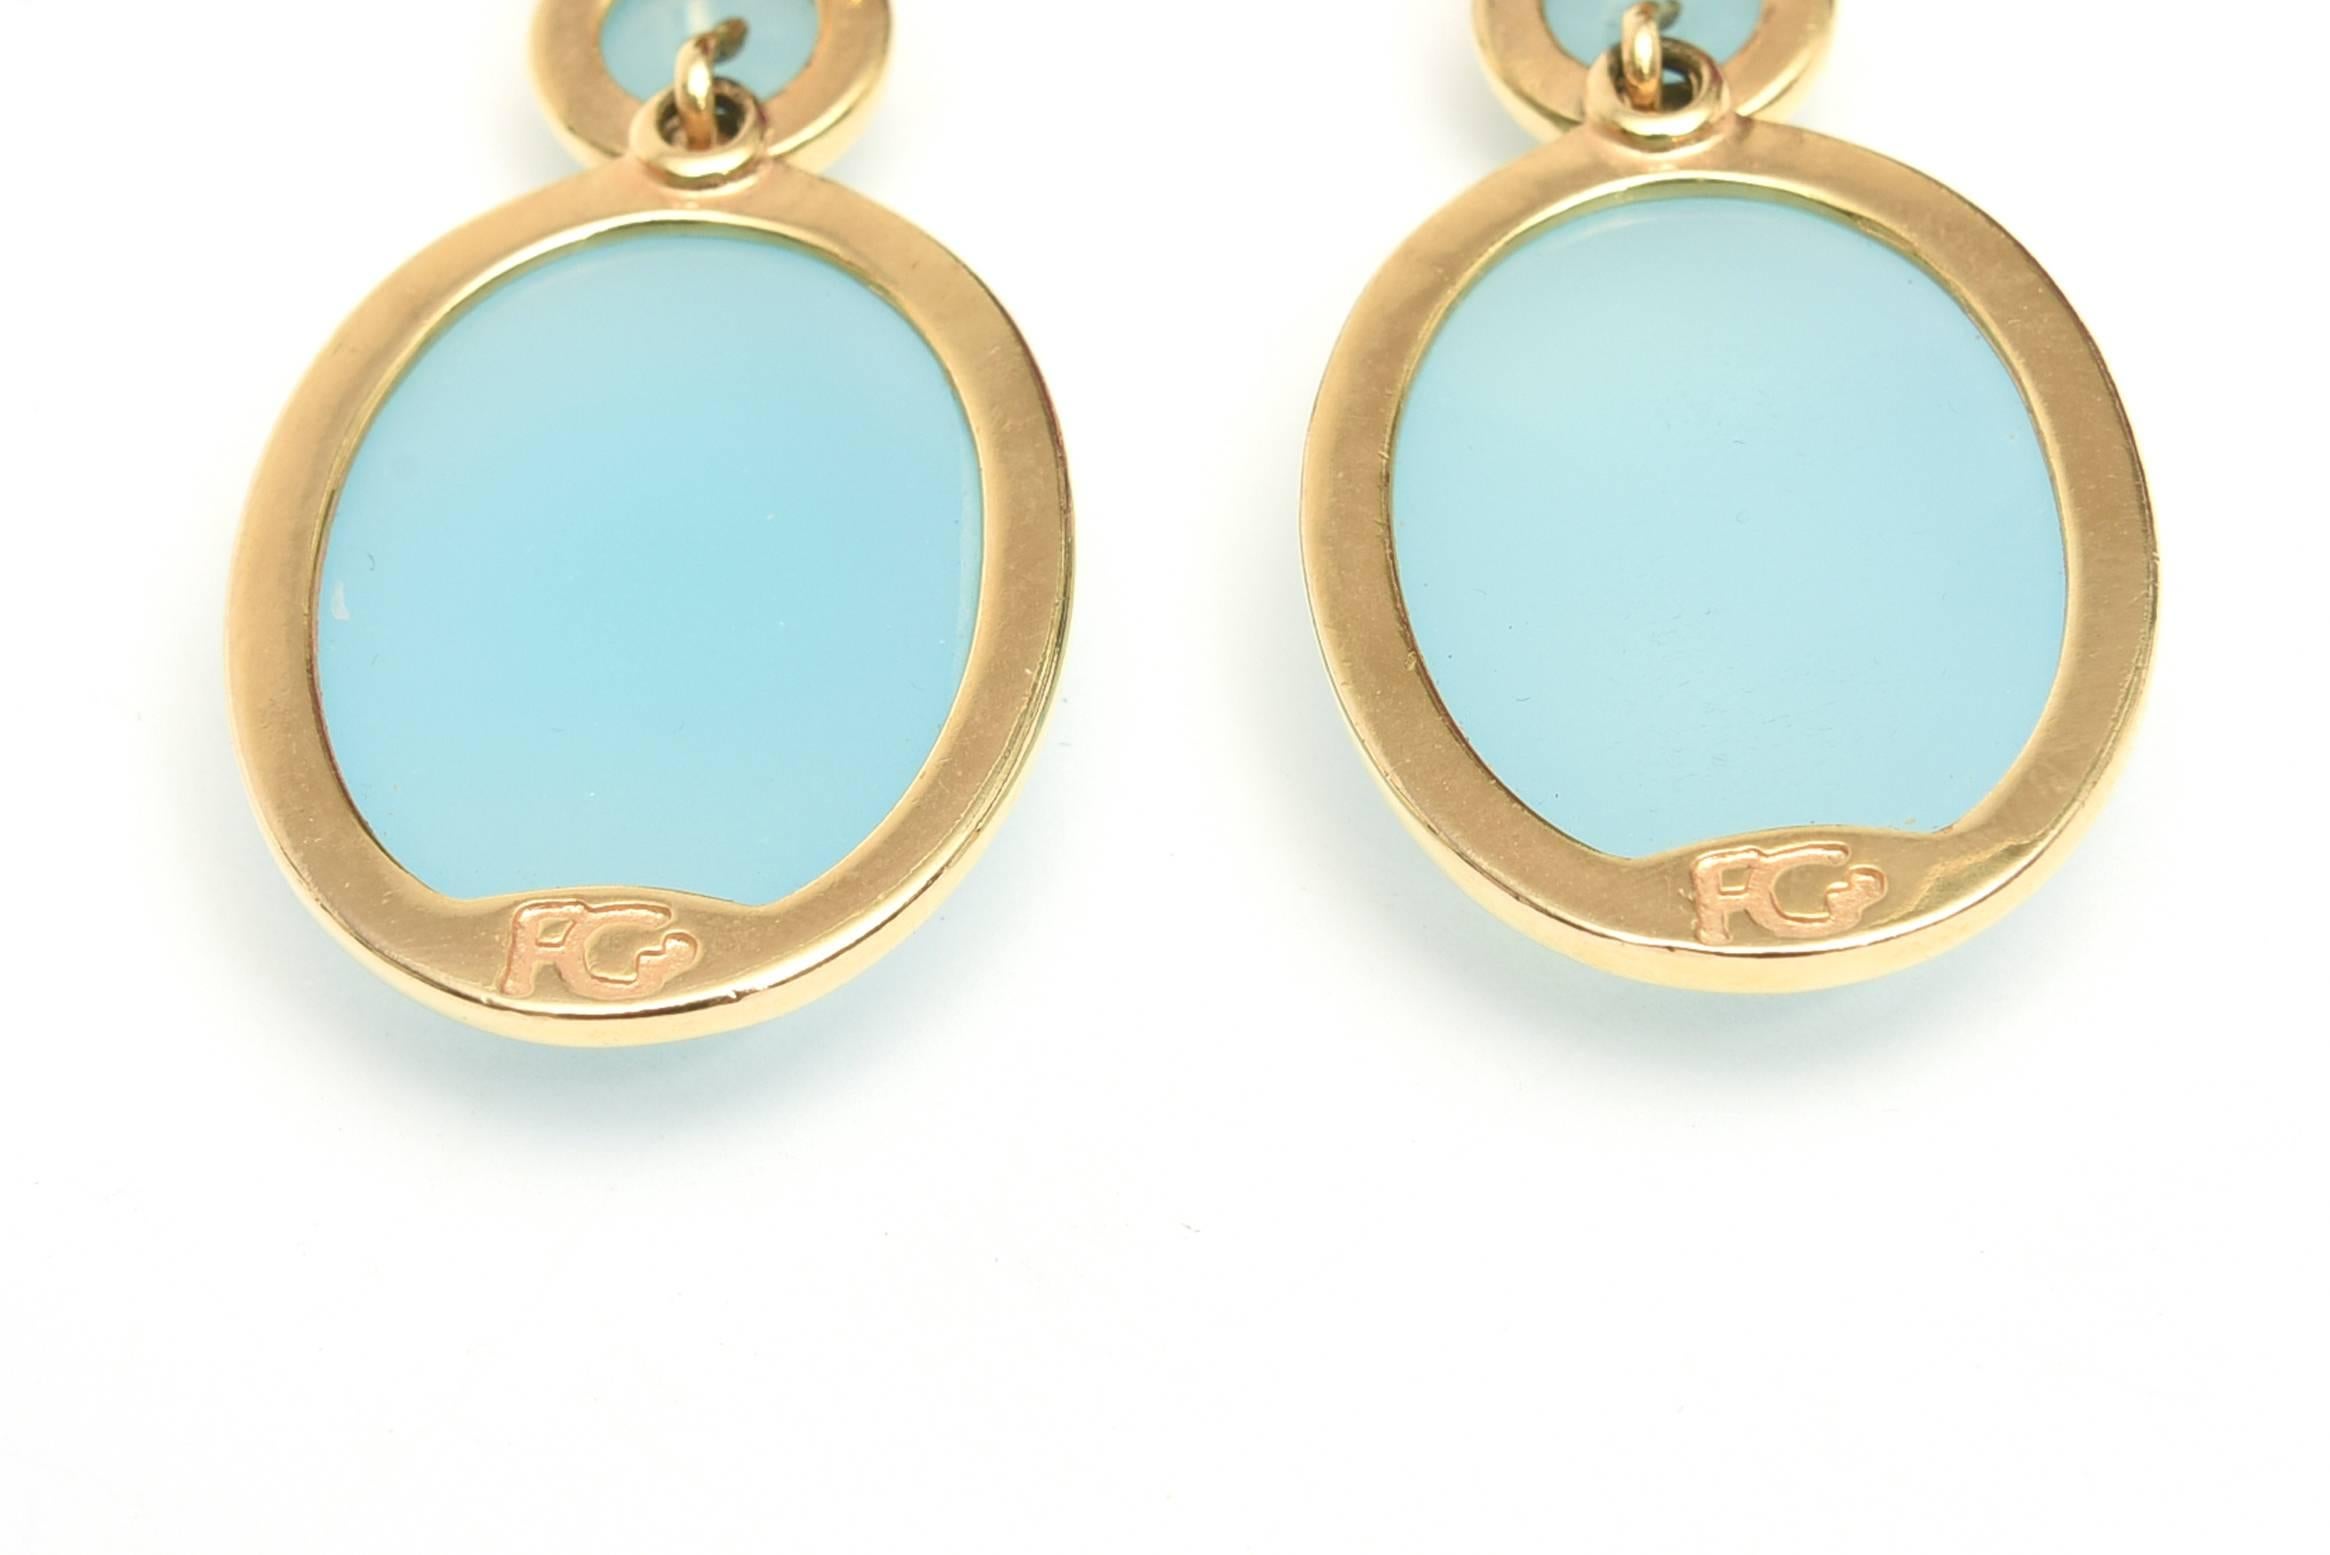 Set of Cabochon Chalcedony 24 Gold Plated Bracelet and Earrings SAT. SALE 3